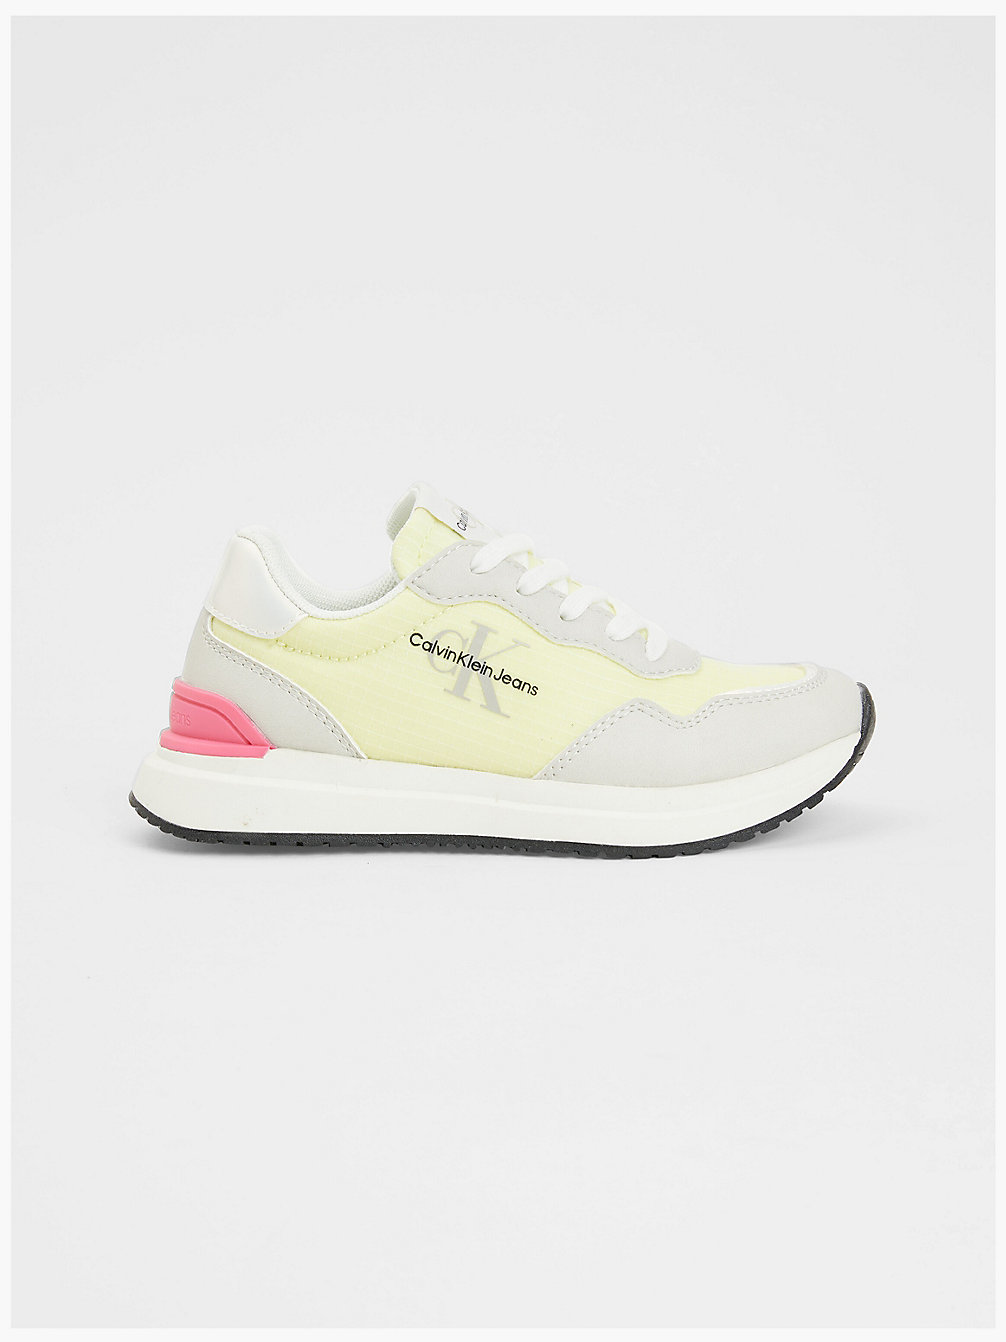 ICE/LIME > Logo-Sneakers > undefined girls - Calvin Klein